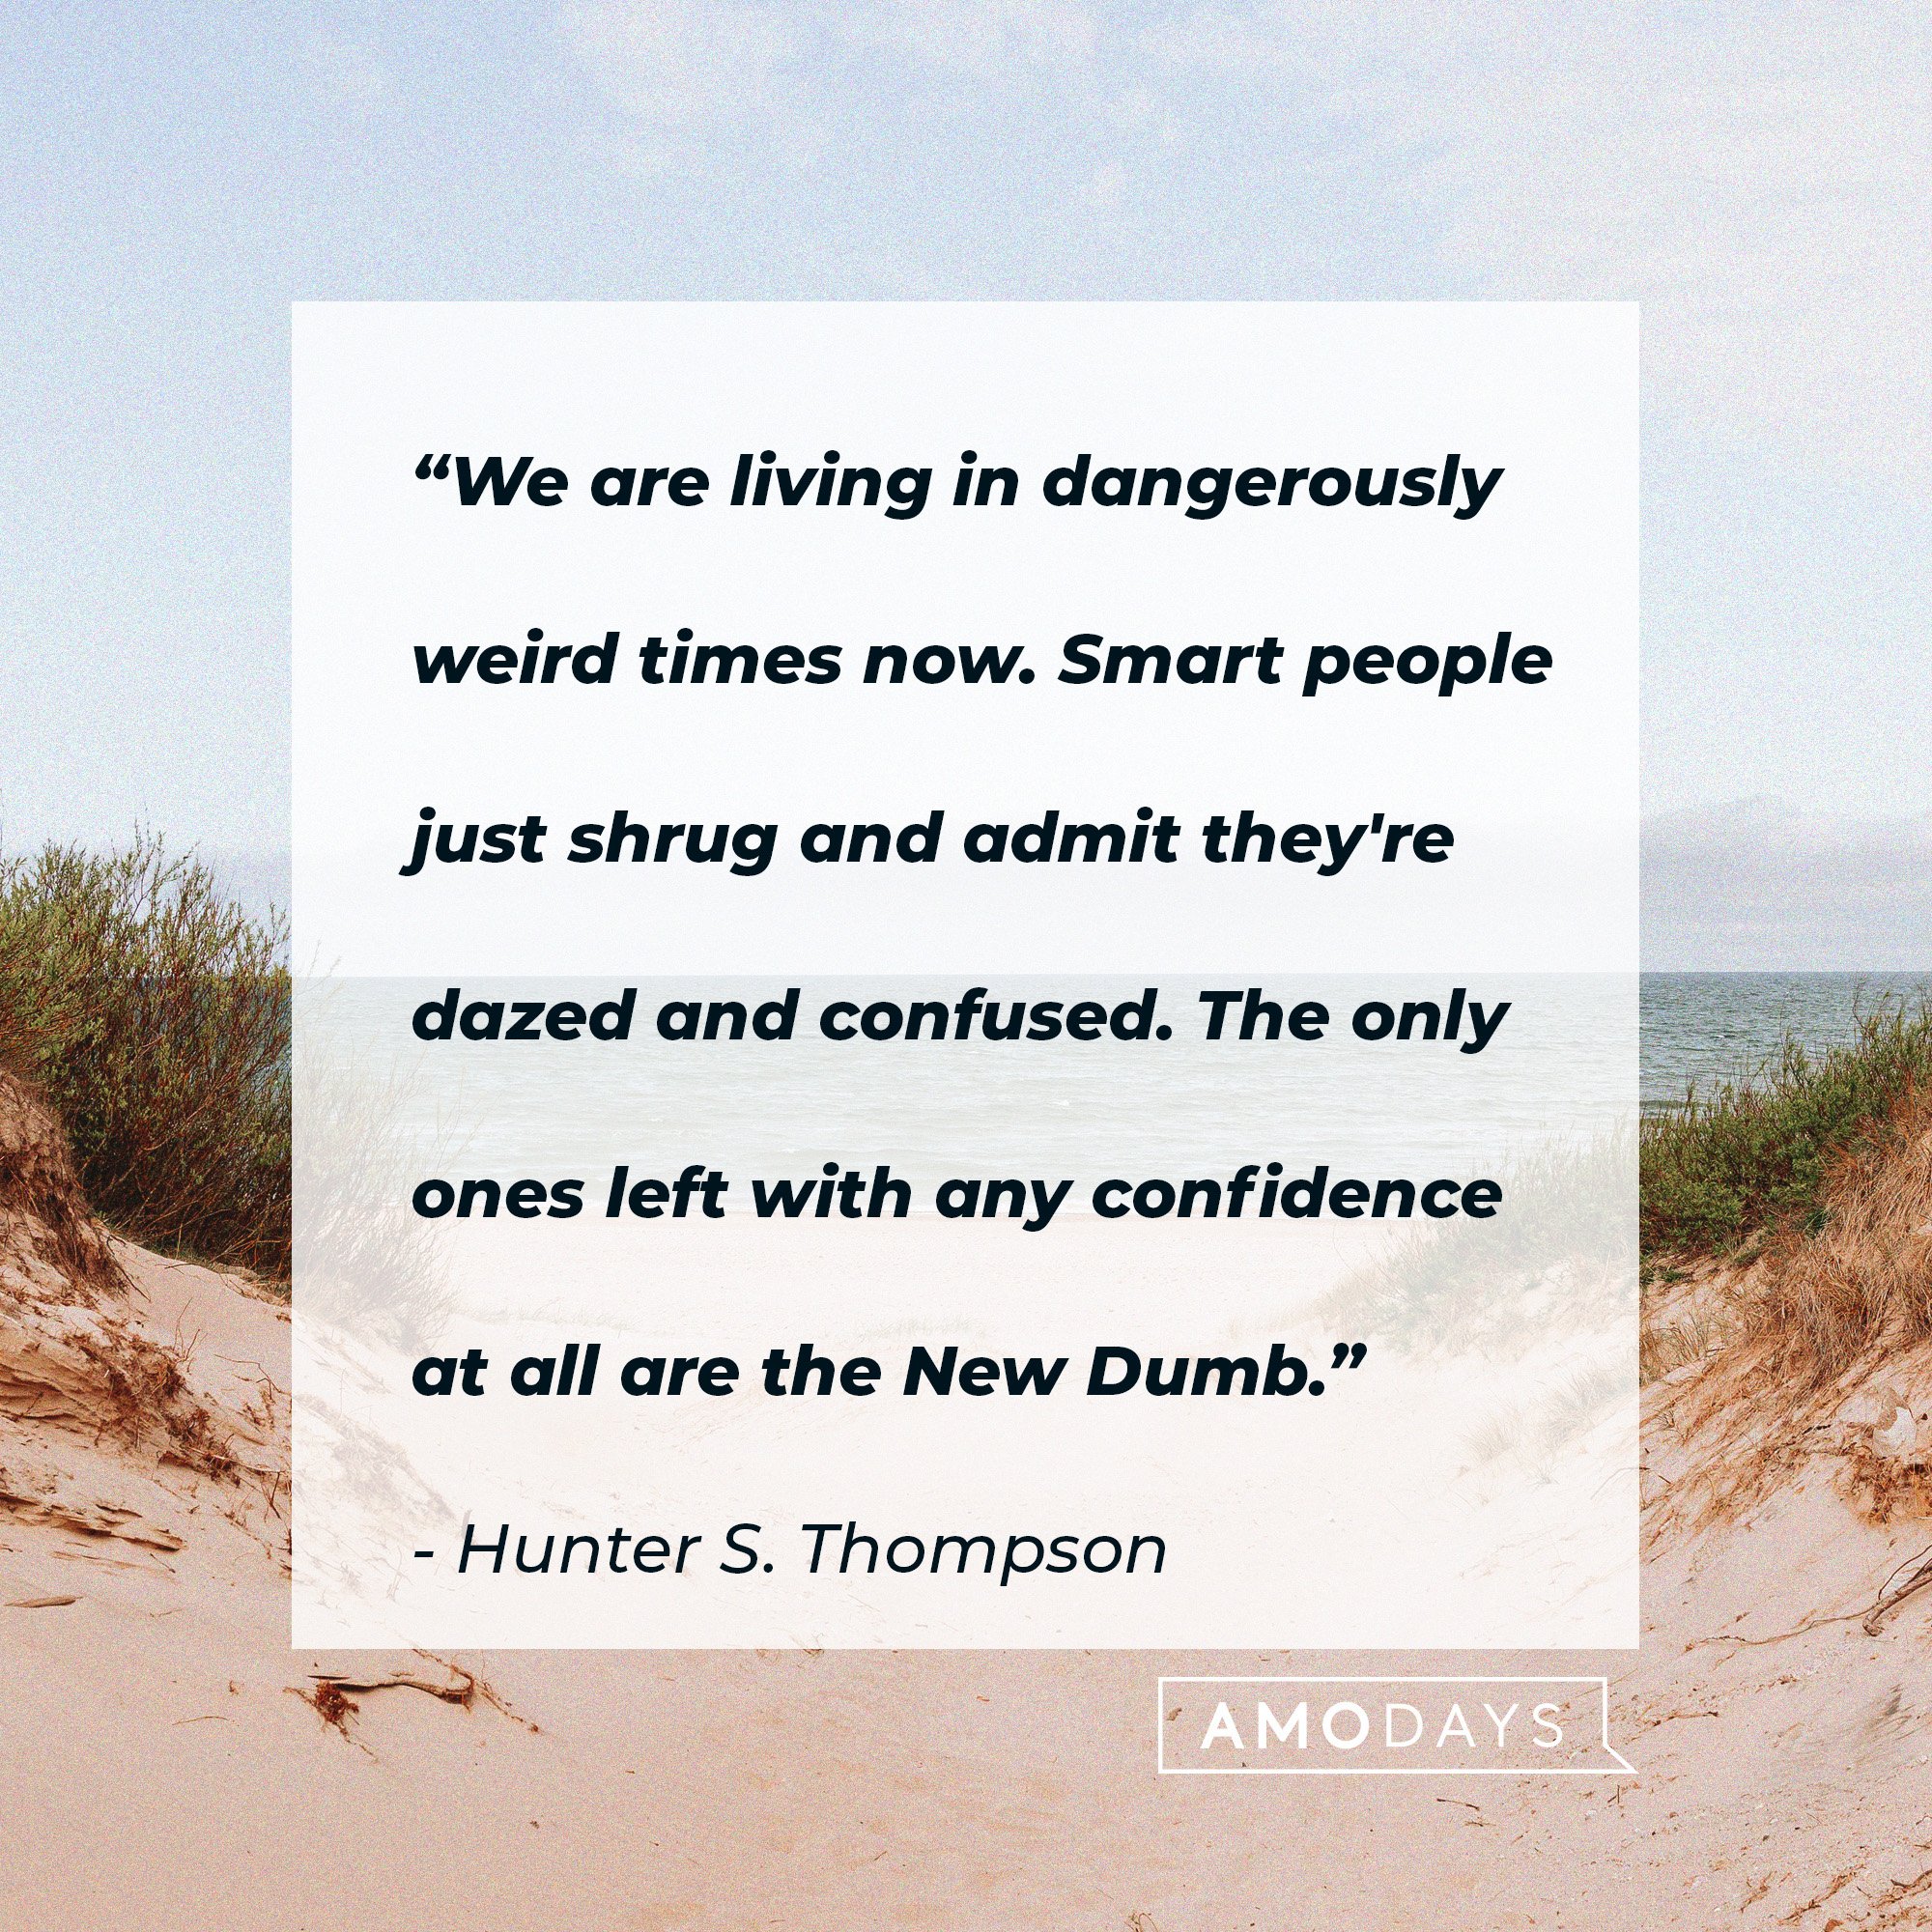 Hunter S. Thompson’s quote: “We are living in dangerously weird times now. Smart people just shrug and admit they're dazed and confused. The only ones left with any confidence at all are the New Dumb.” | Image: AmoDays